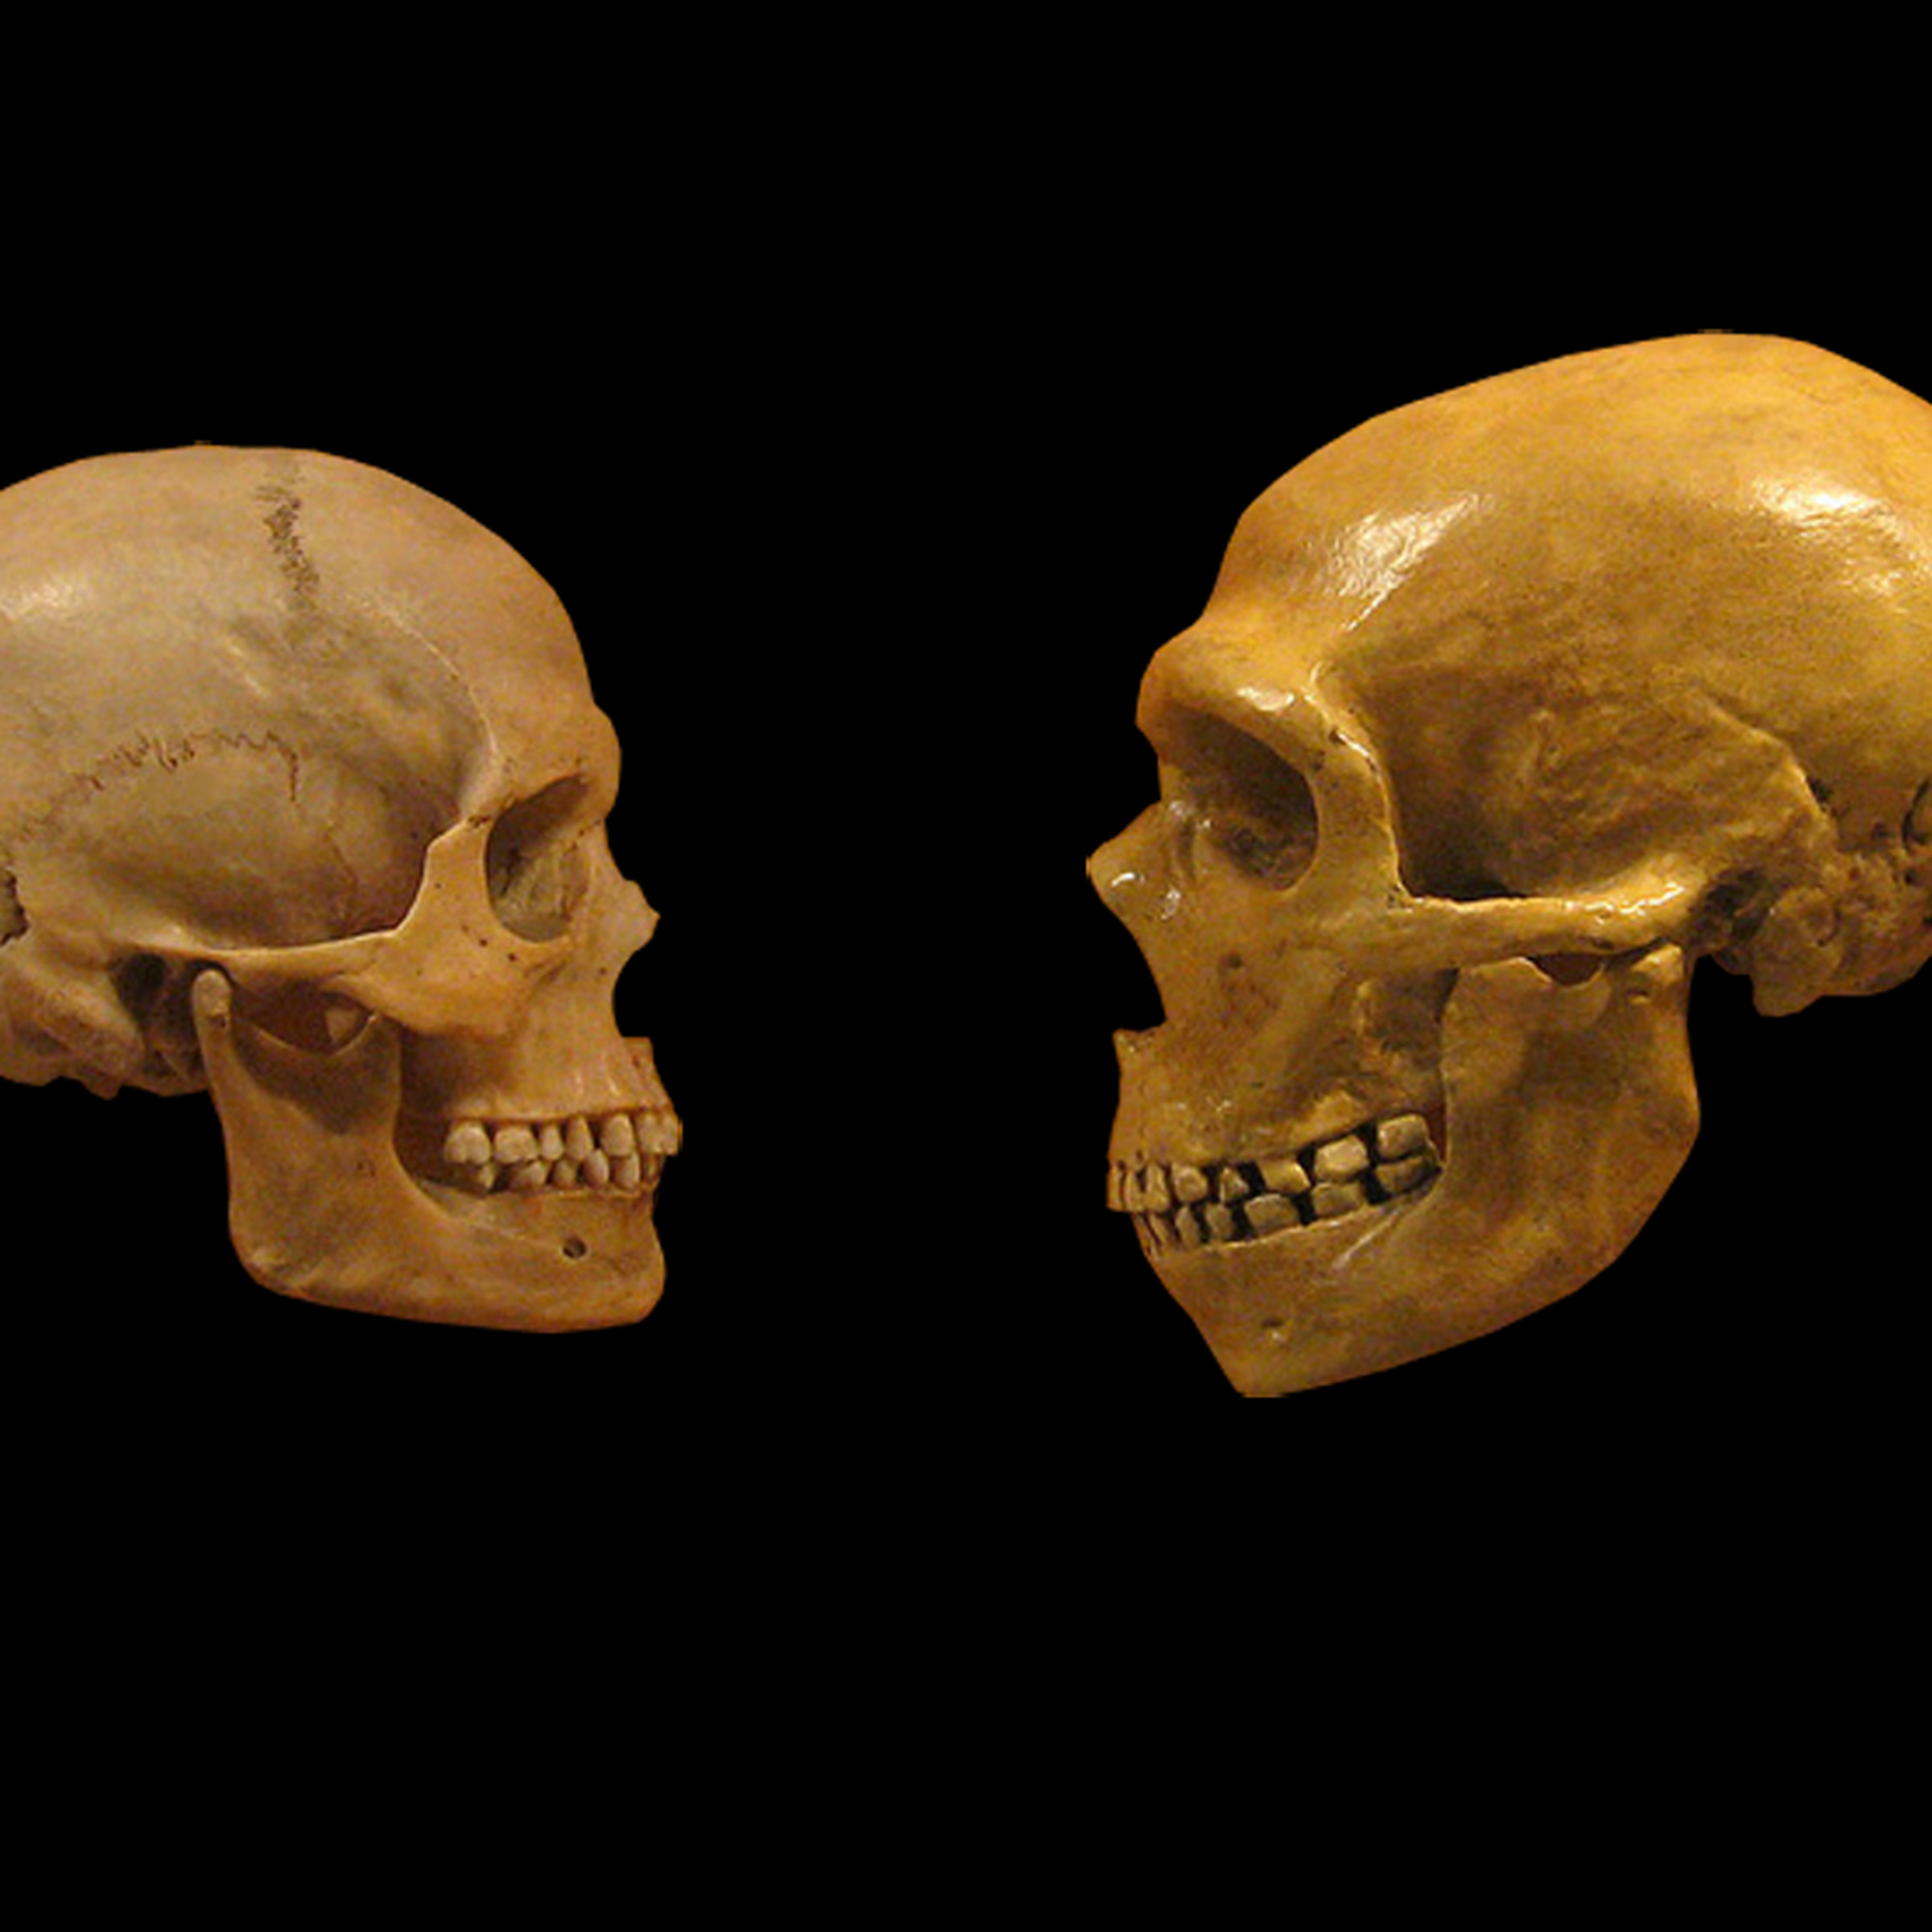 A modern human and a Neanderthal skull facing each other. Photo by hairymuseummat (from the Cleveland Museum of Natural History) modified by DrMikeBaxter/Wikimedia Commons